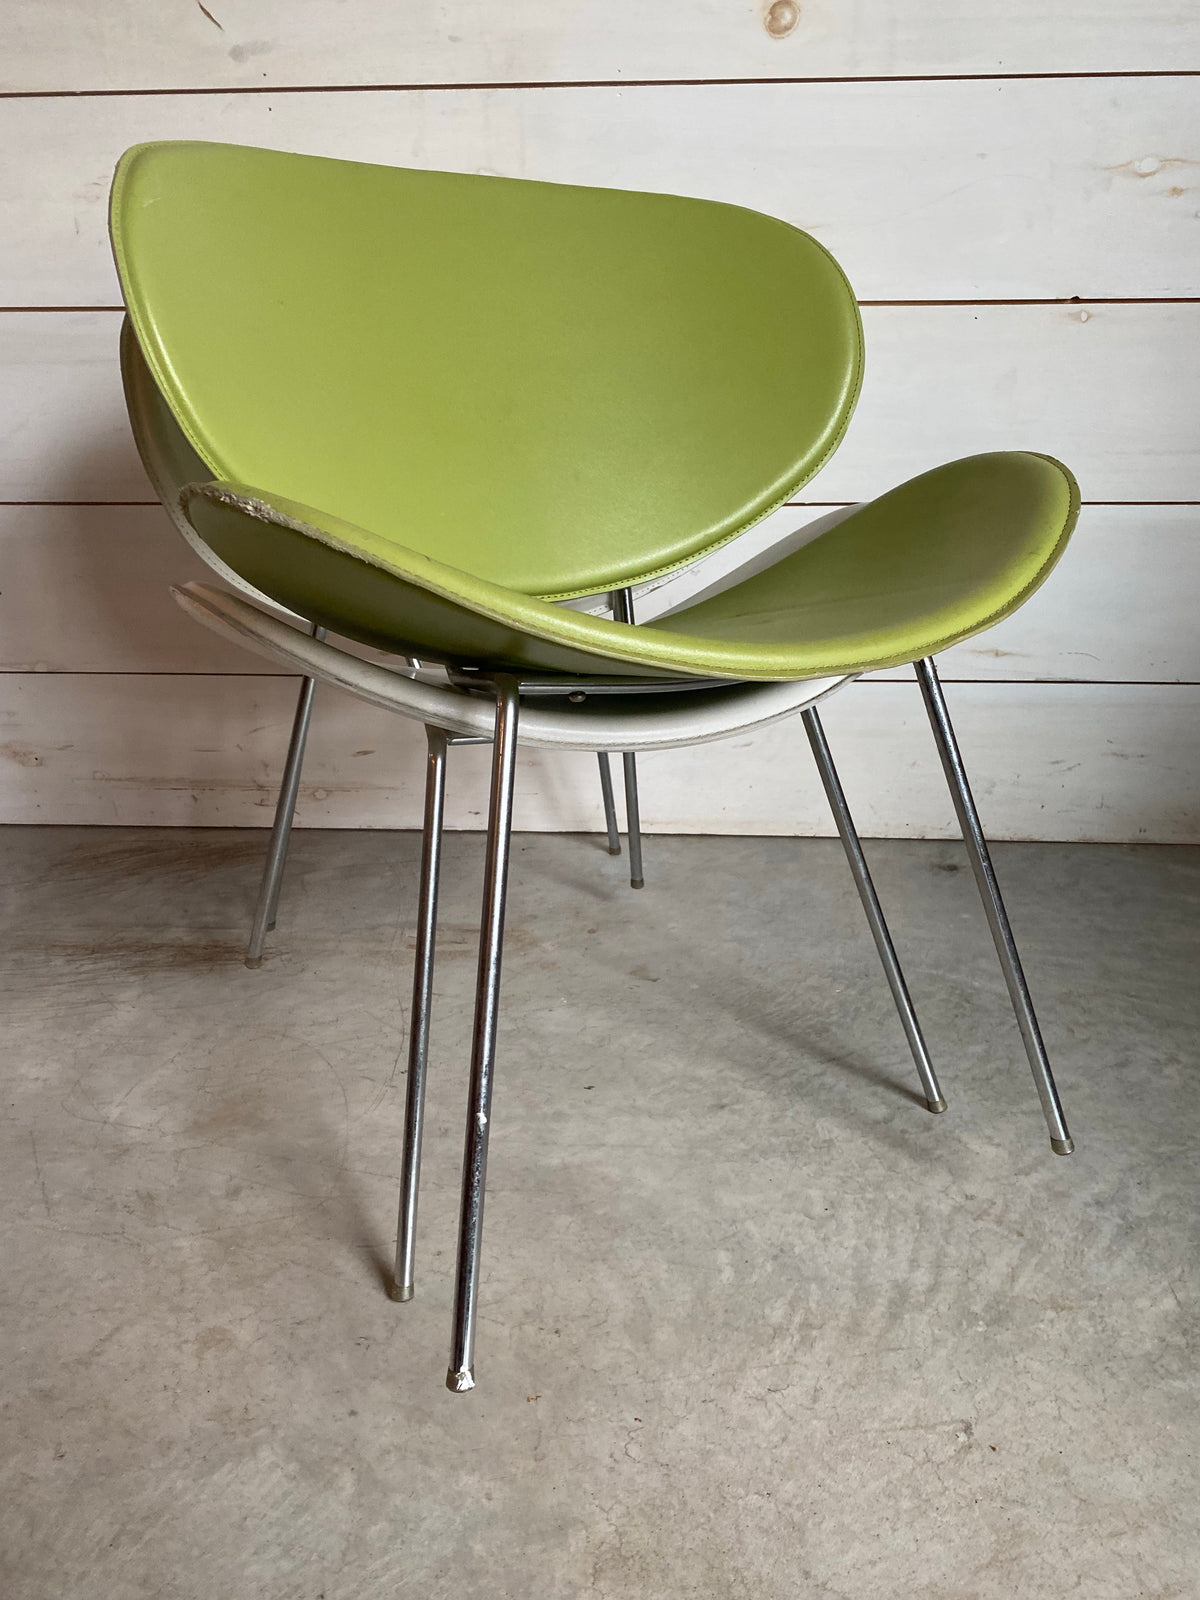 Vintage Leather Clamshell Chair - Avocado